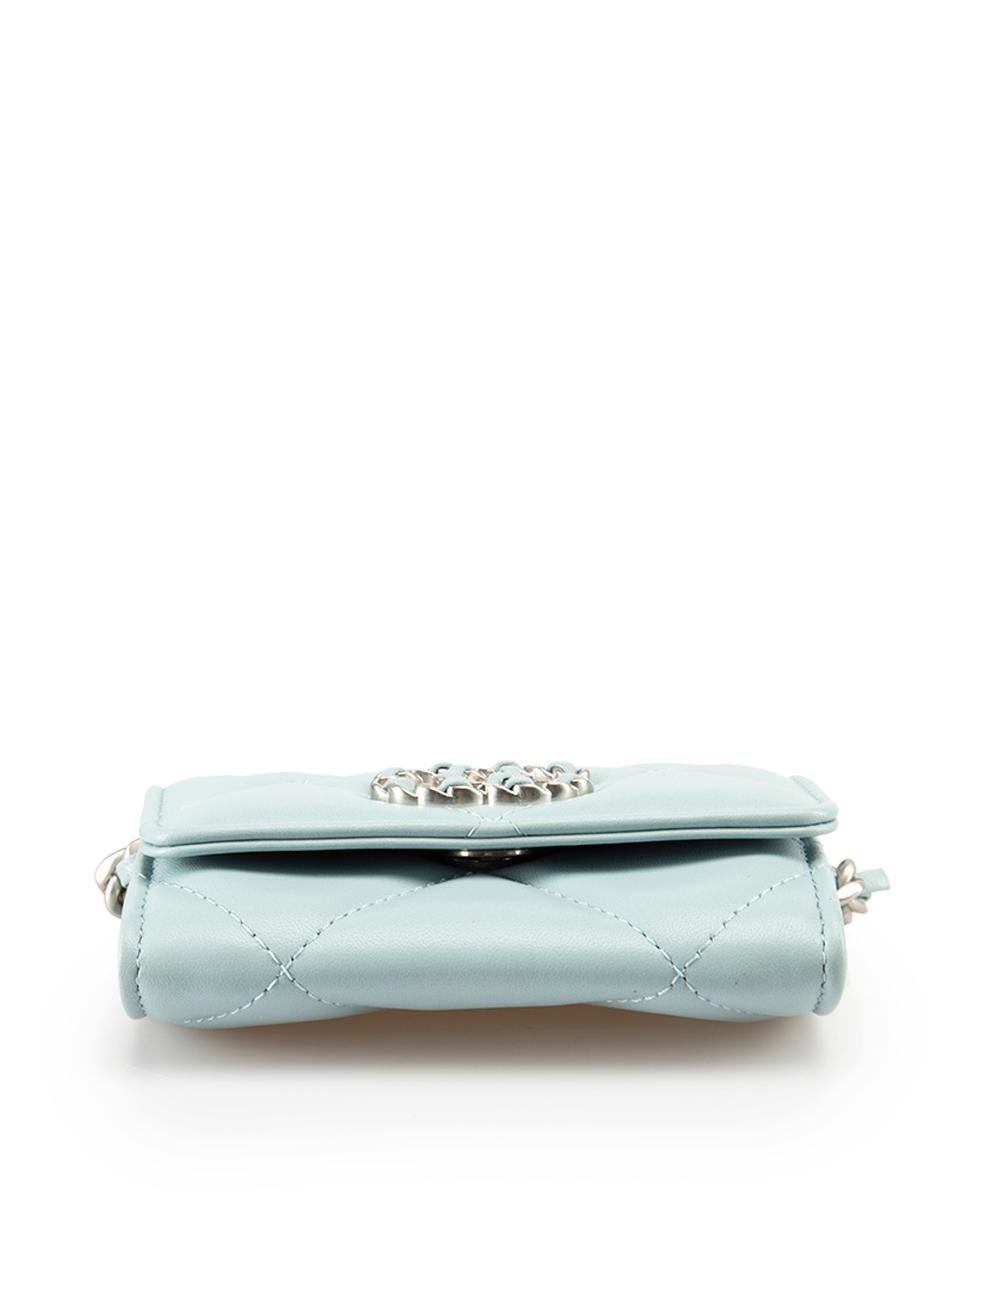 Women's Chanel Blue Leather Chanel 19 Mini Chain Cardholder Wallet For Sale